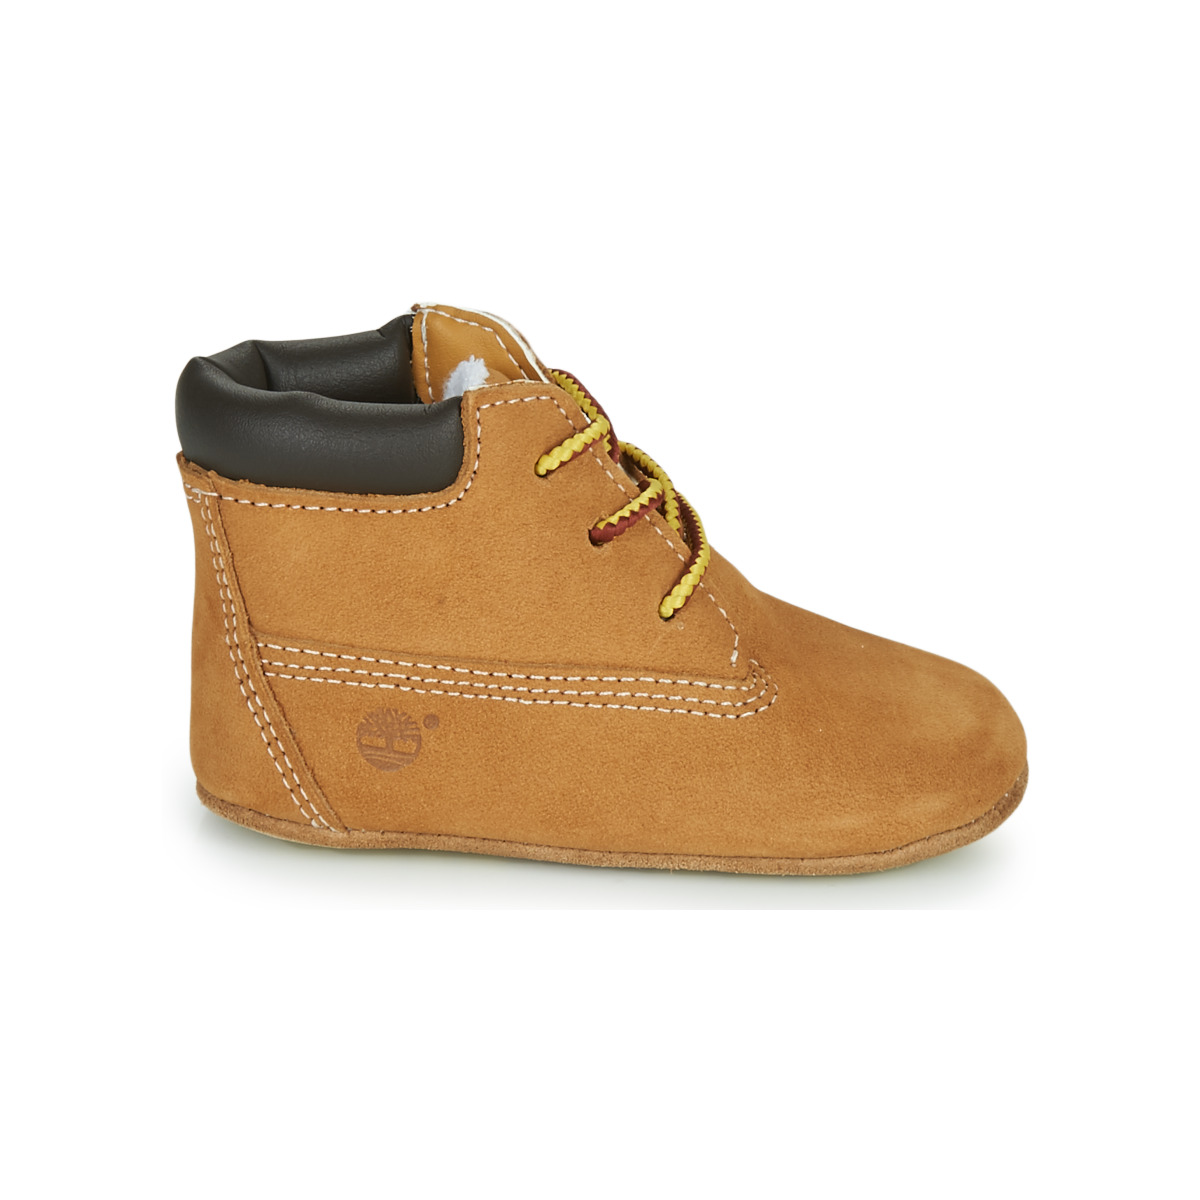 Timberland Blé / Marron CRIB BOOTIE WITH HAT aautGAon